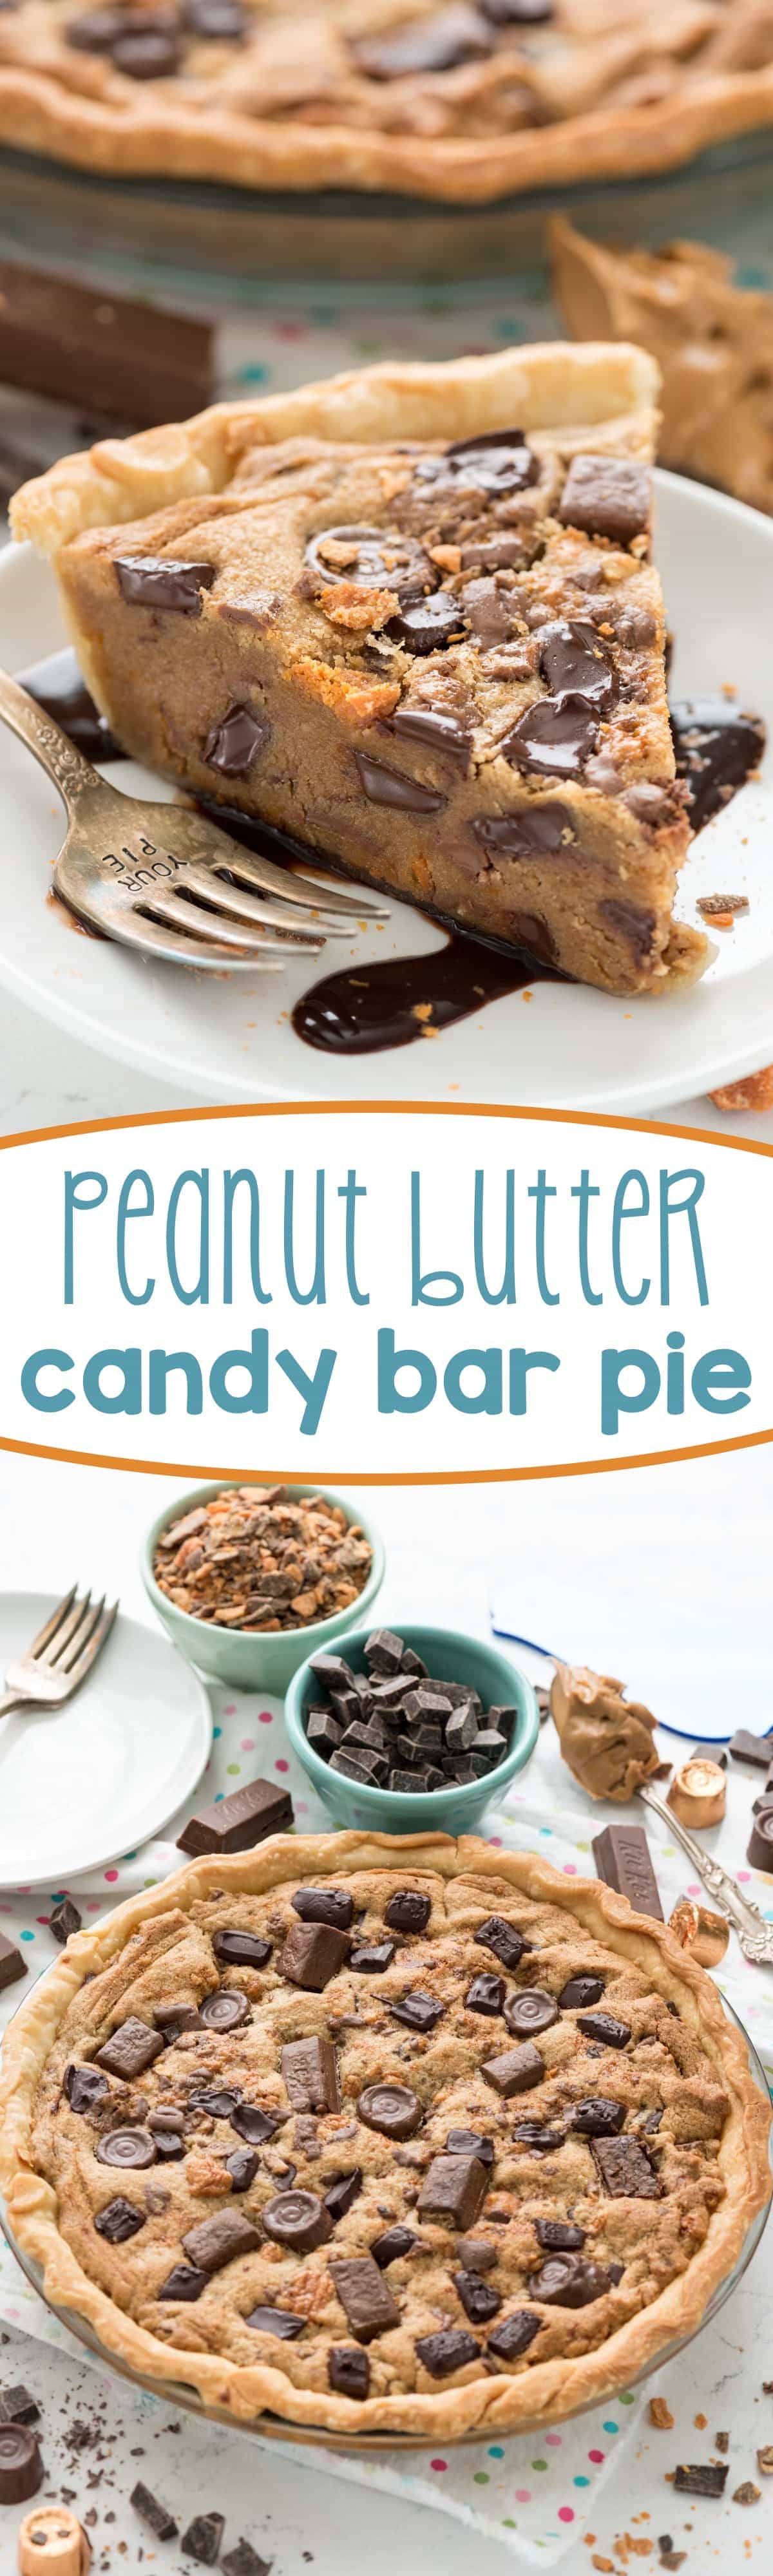 Peanut Butter Candy Bar Pie - this easy peanut butter cookie pie recipe is filled with candy bars! It's a giant cookie with a crust - heaven!